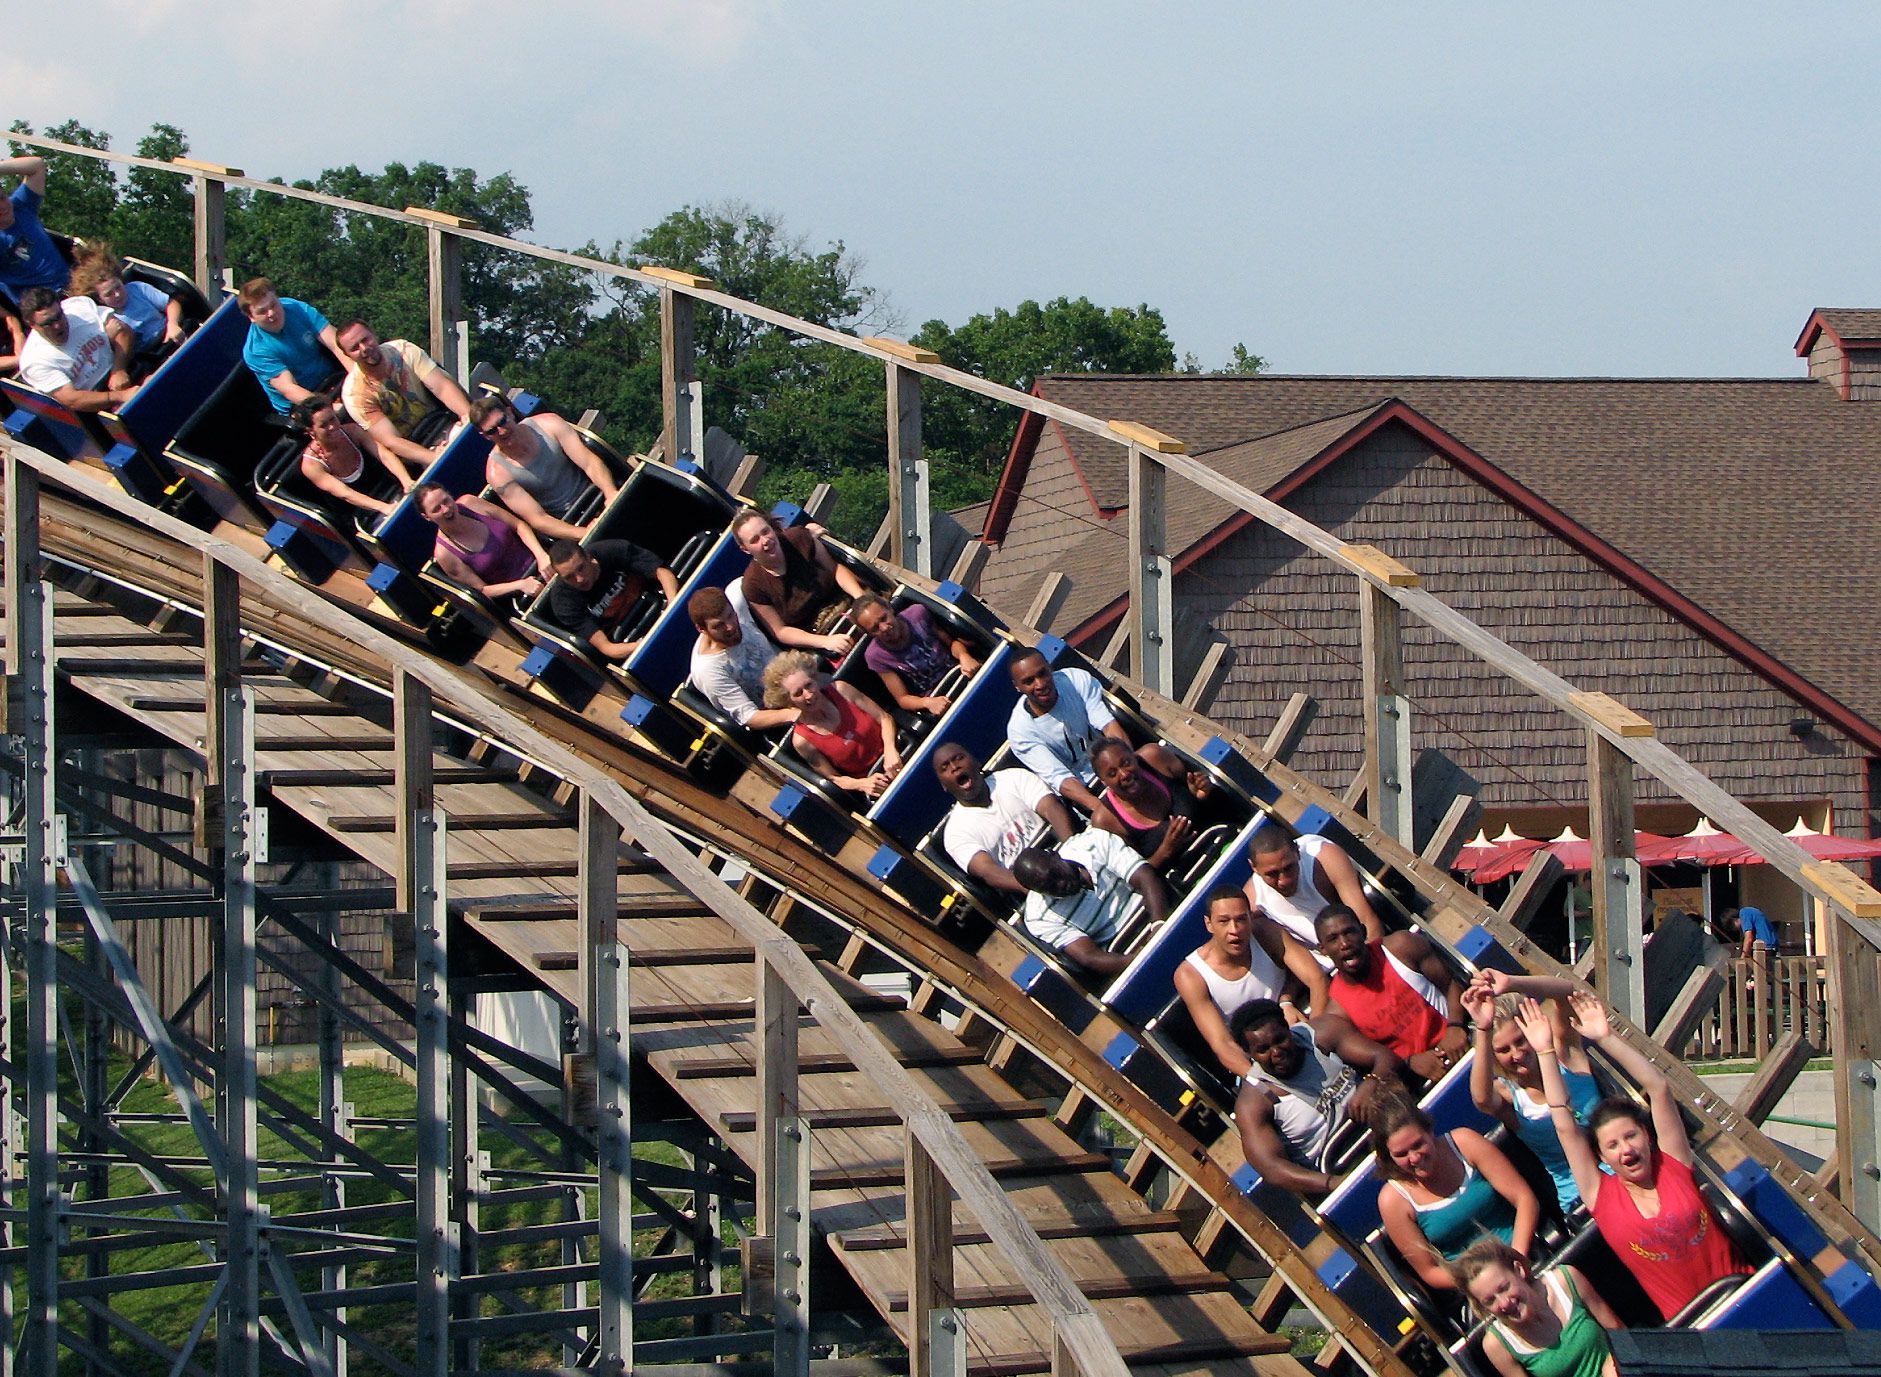 The Voyage Review of Holiday World Roller Coaster